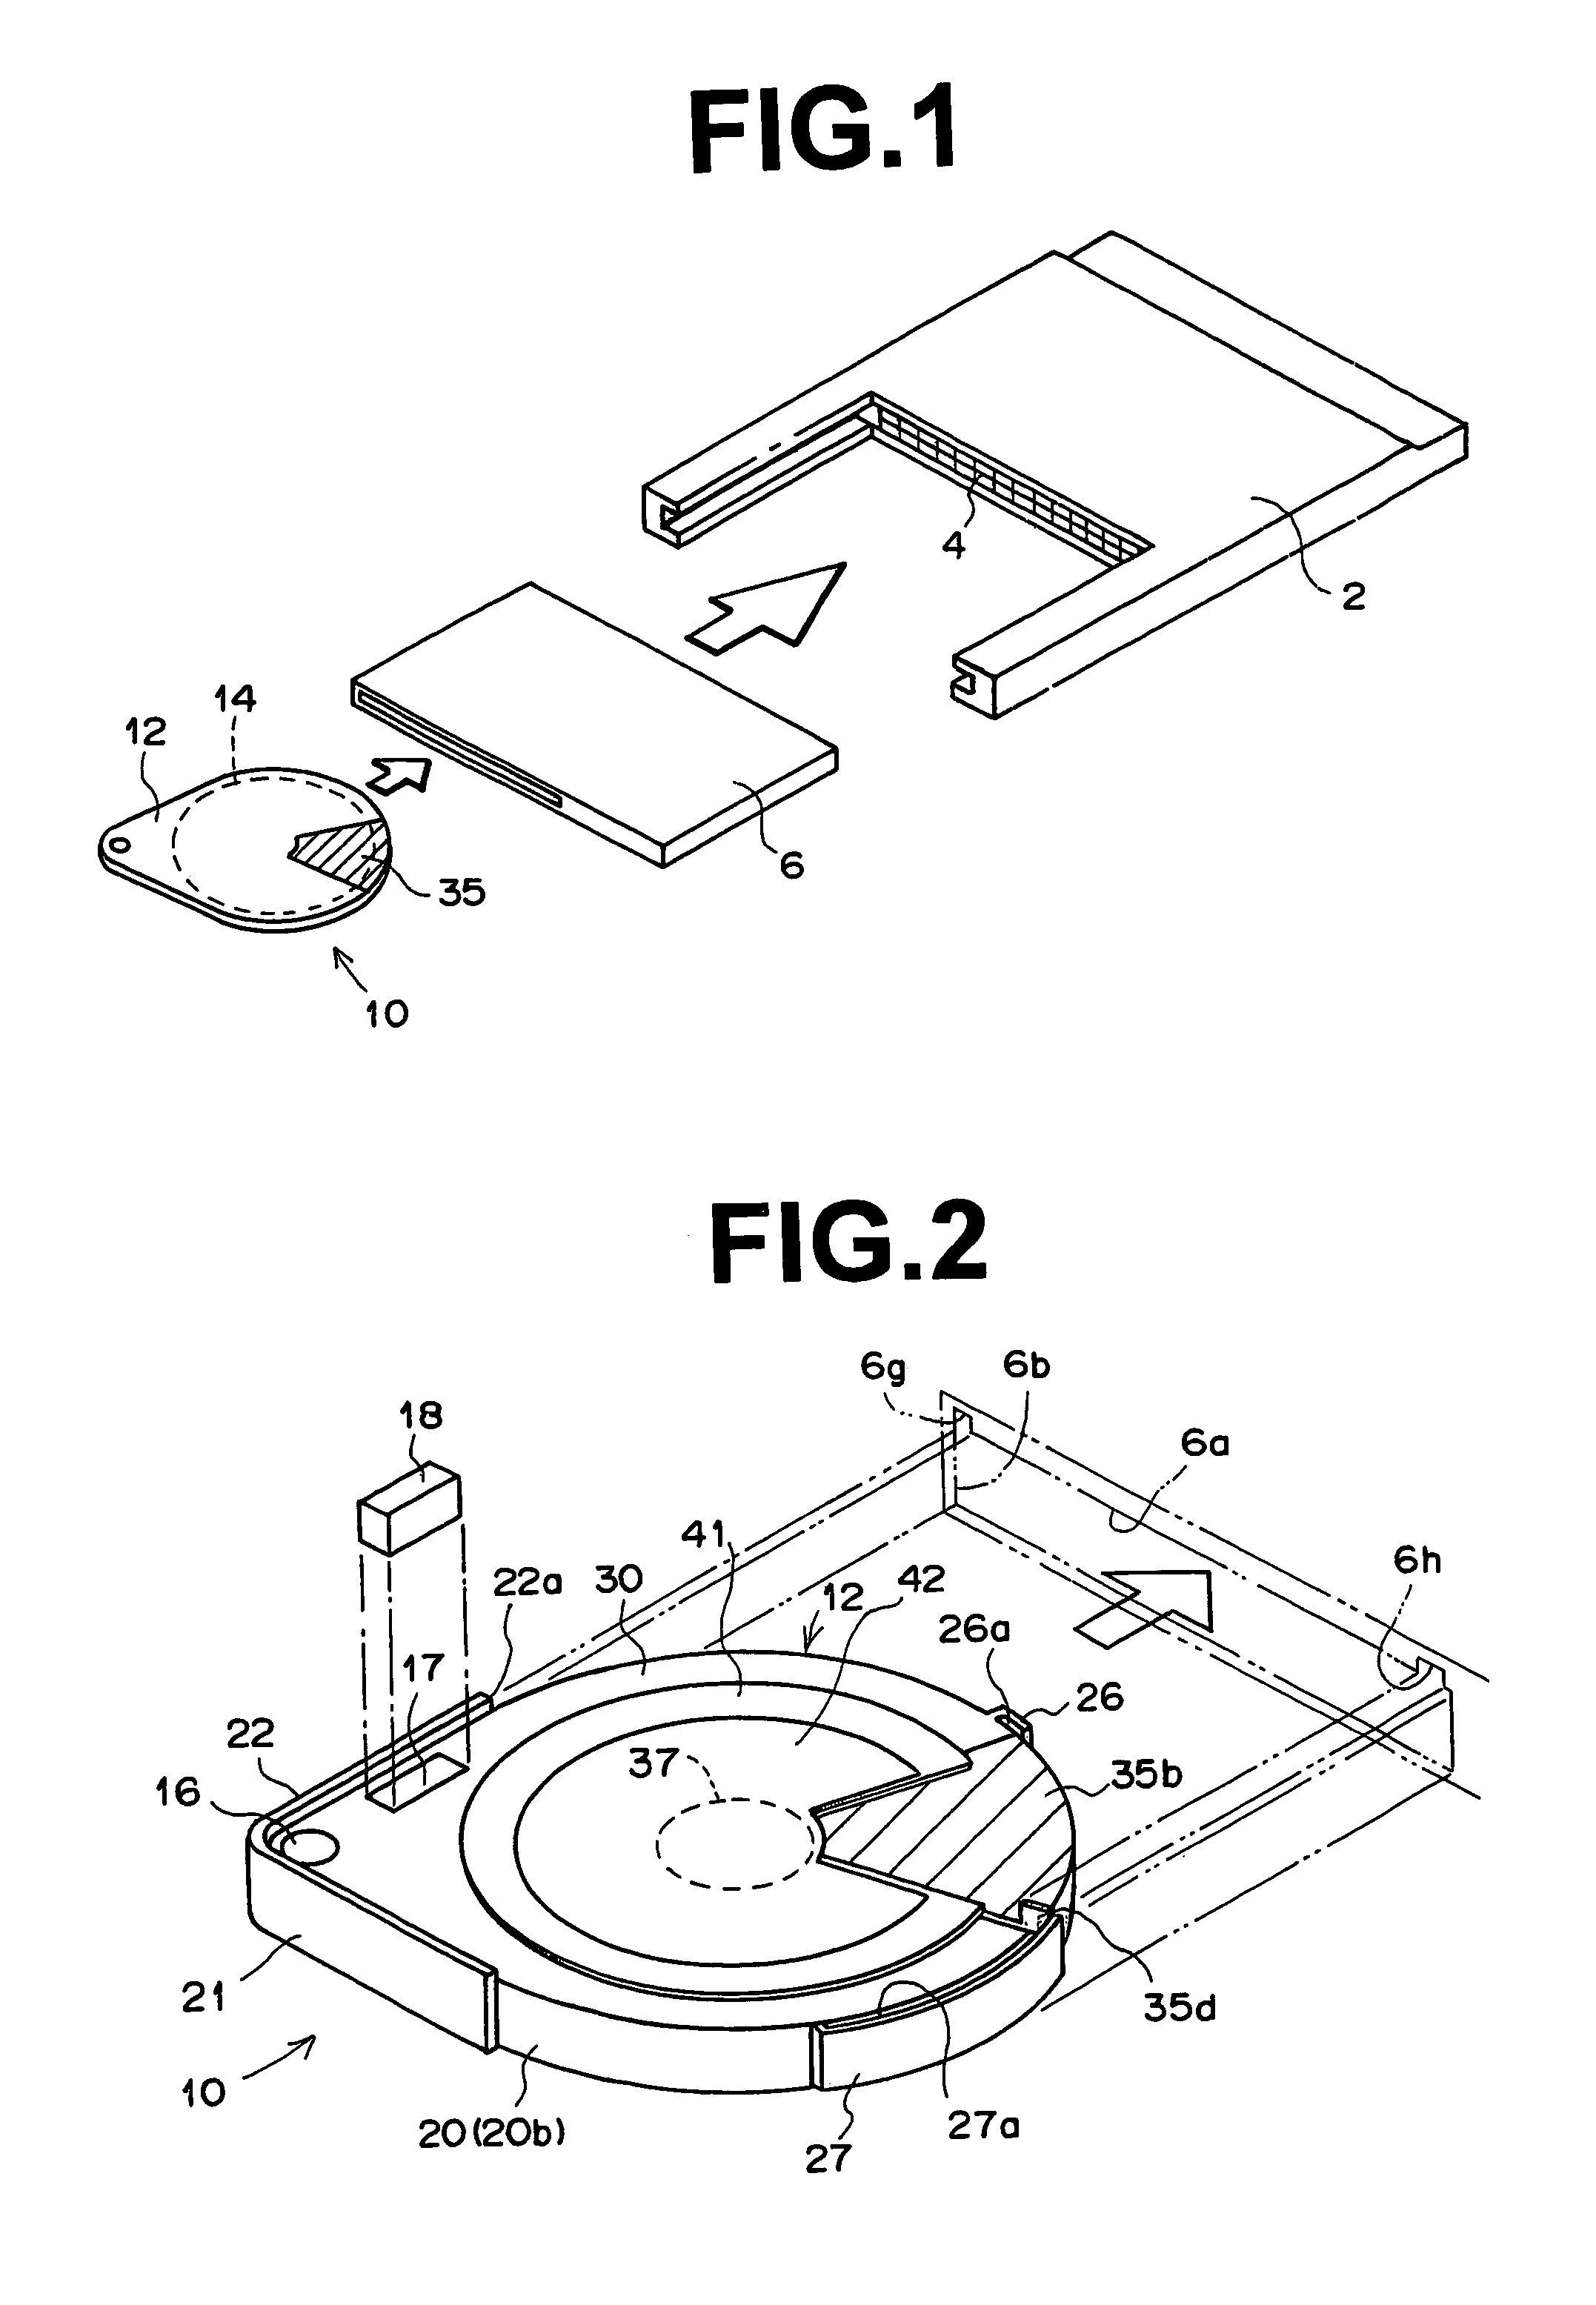 Magnetic disk cartridge with housing composed of circular ARC and straight lines normal to each other